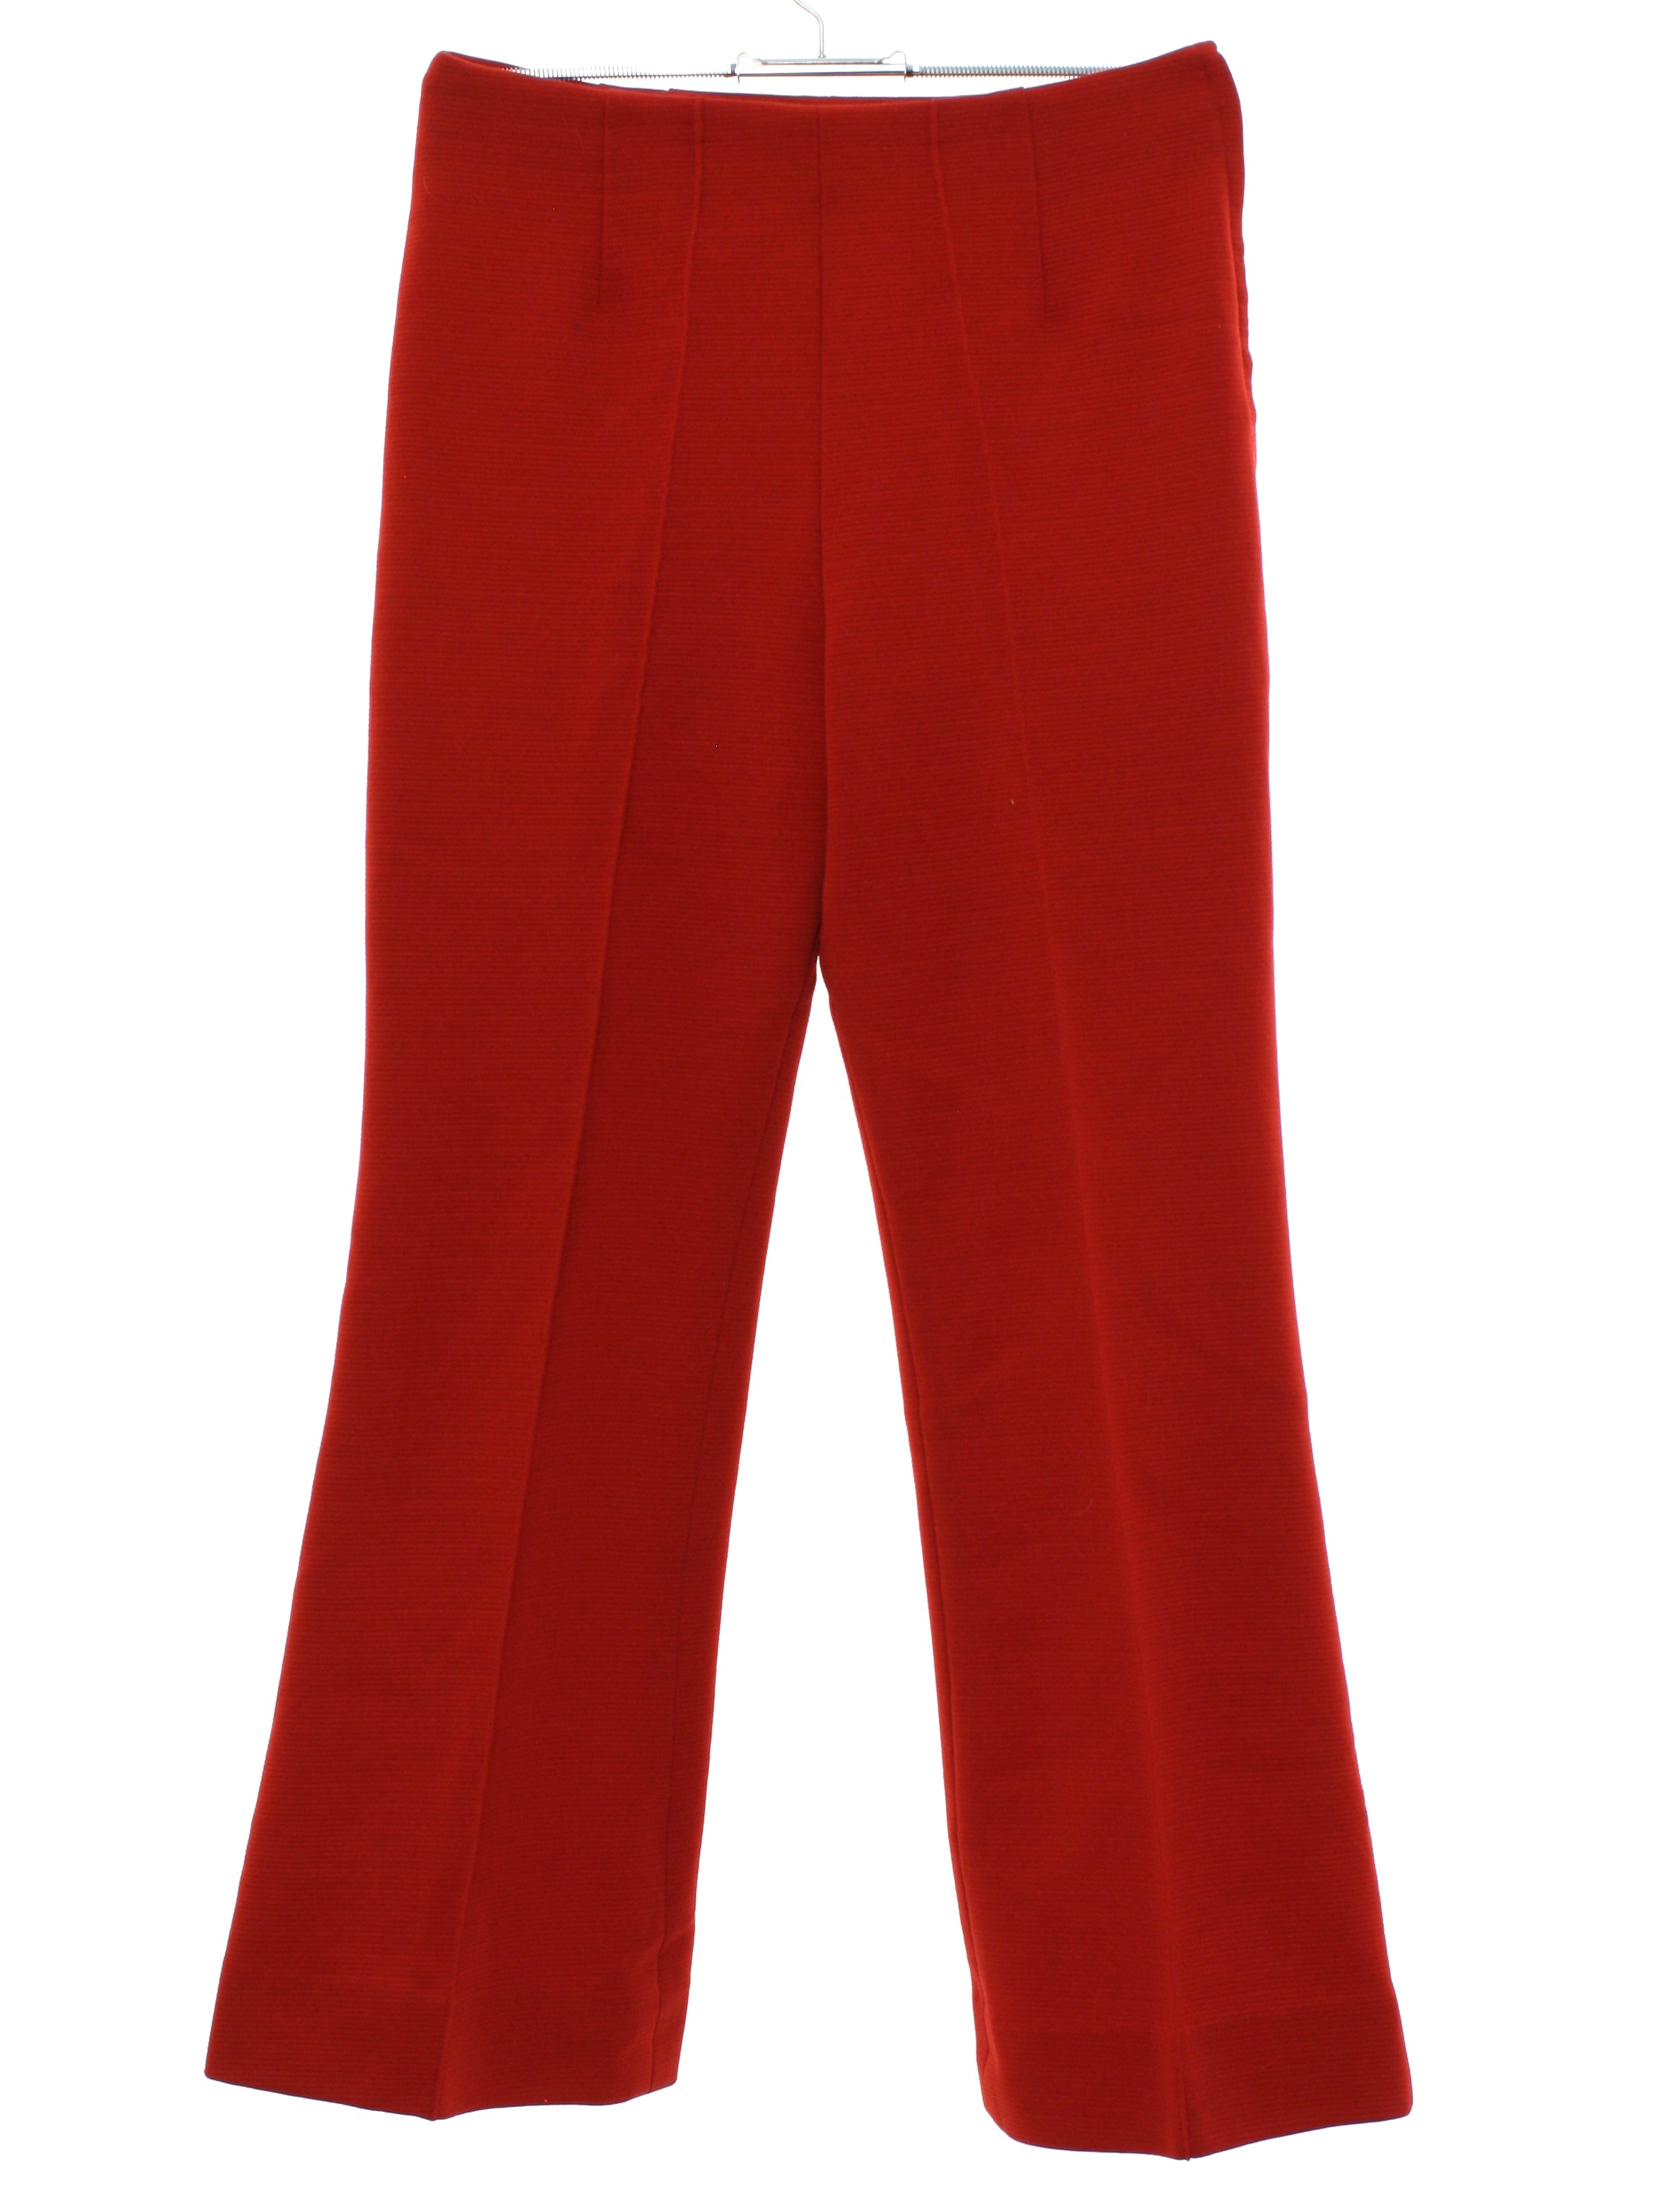 70's Vintage Bellbottom Pants: 70s -Home Sewn- Womens red background ...